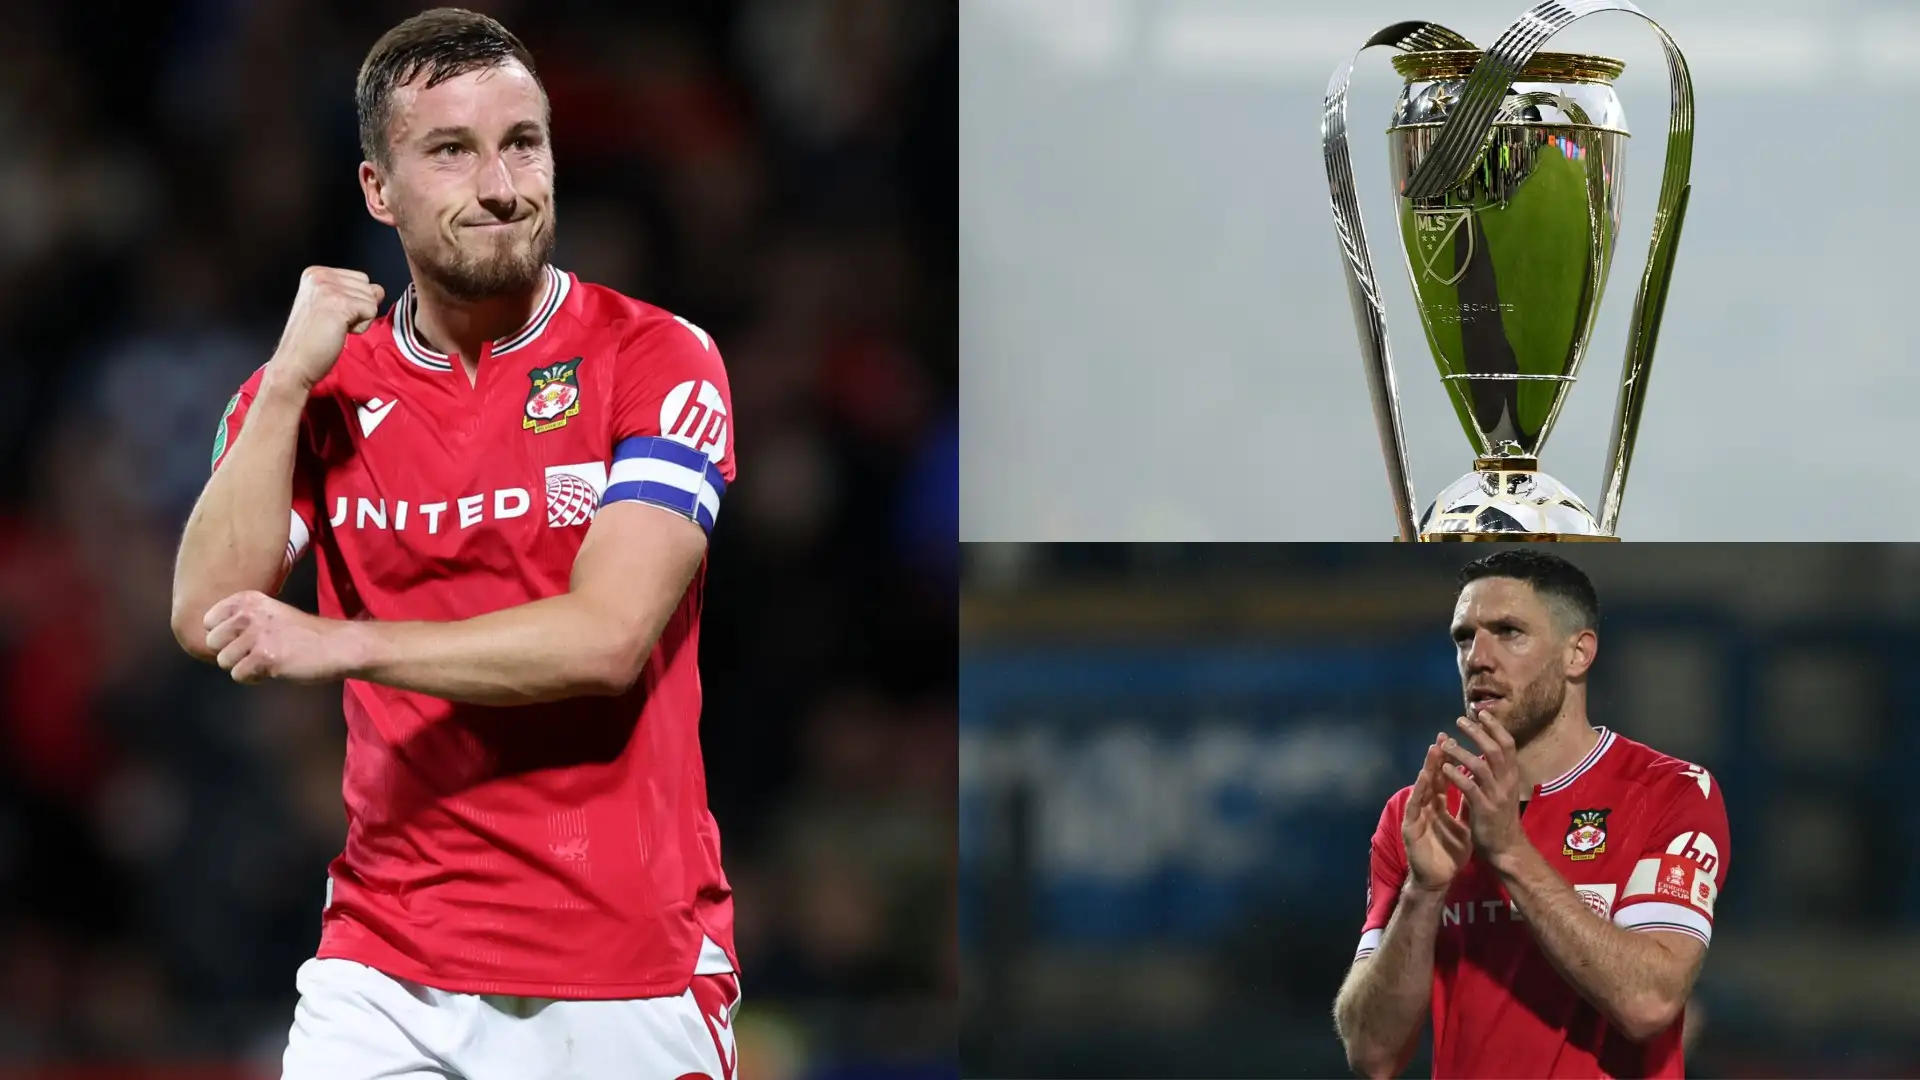 Wrexham's released list MLS clubs should be doing all they can to sign double promotion-winning castoffs - documentary success will put bums on seats